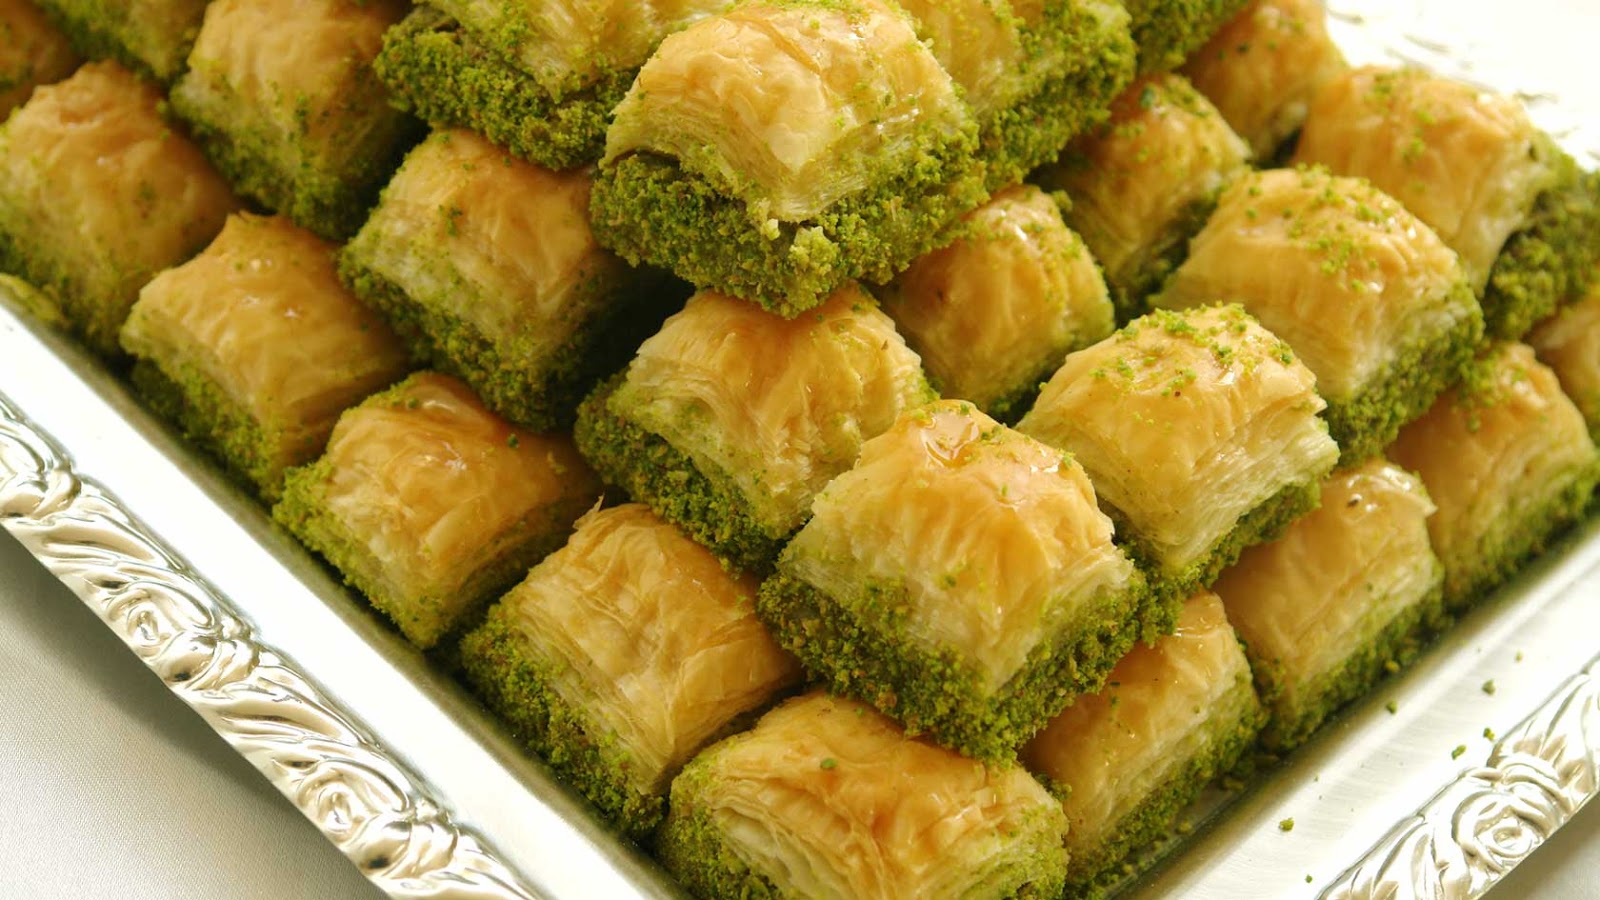 How To Store Baklava